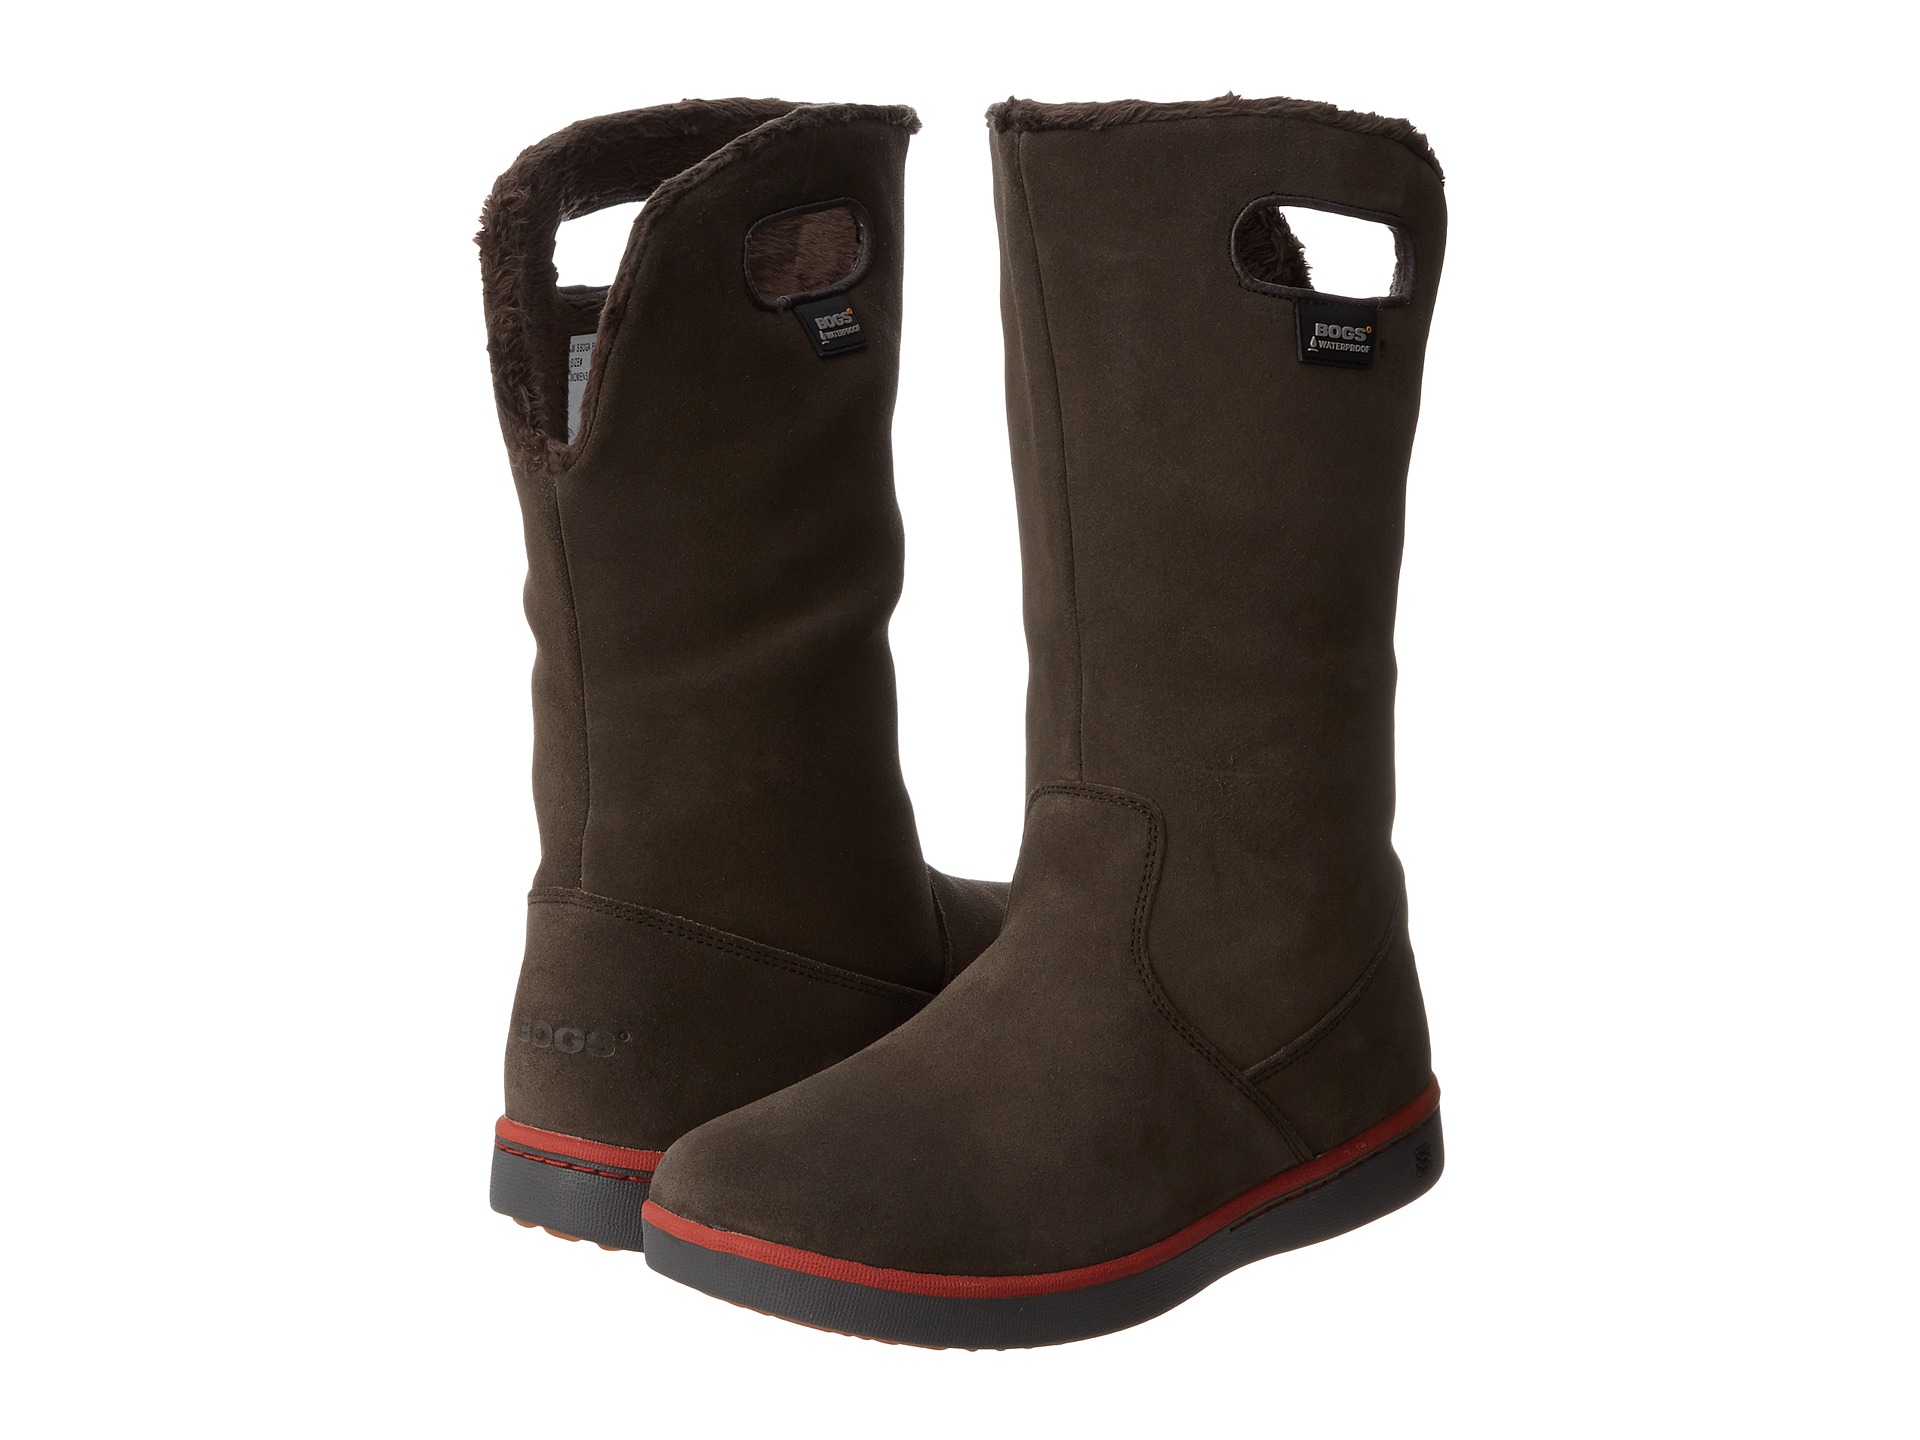 Bogs Boga Boot Chocolate - Zappos Free Shipping BOTH Ways